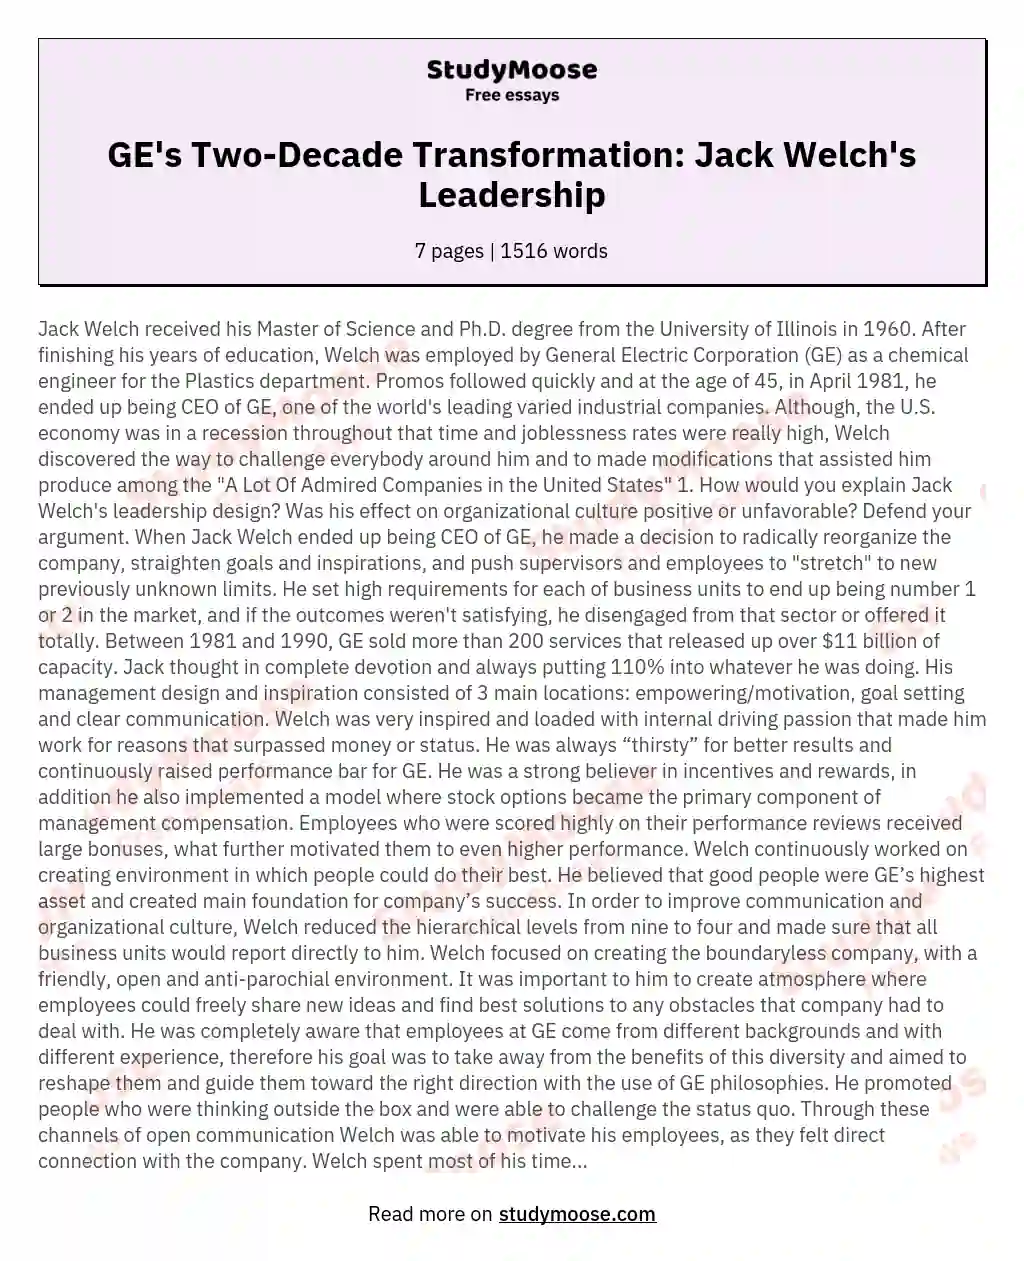 ges two decade transformation